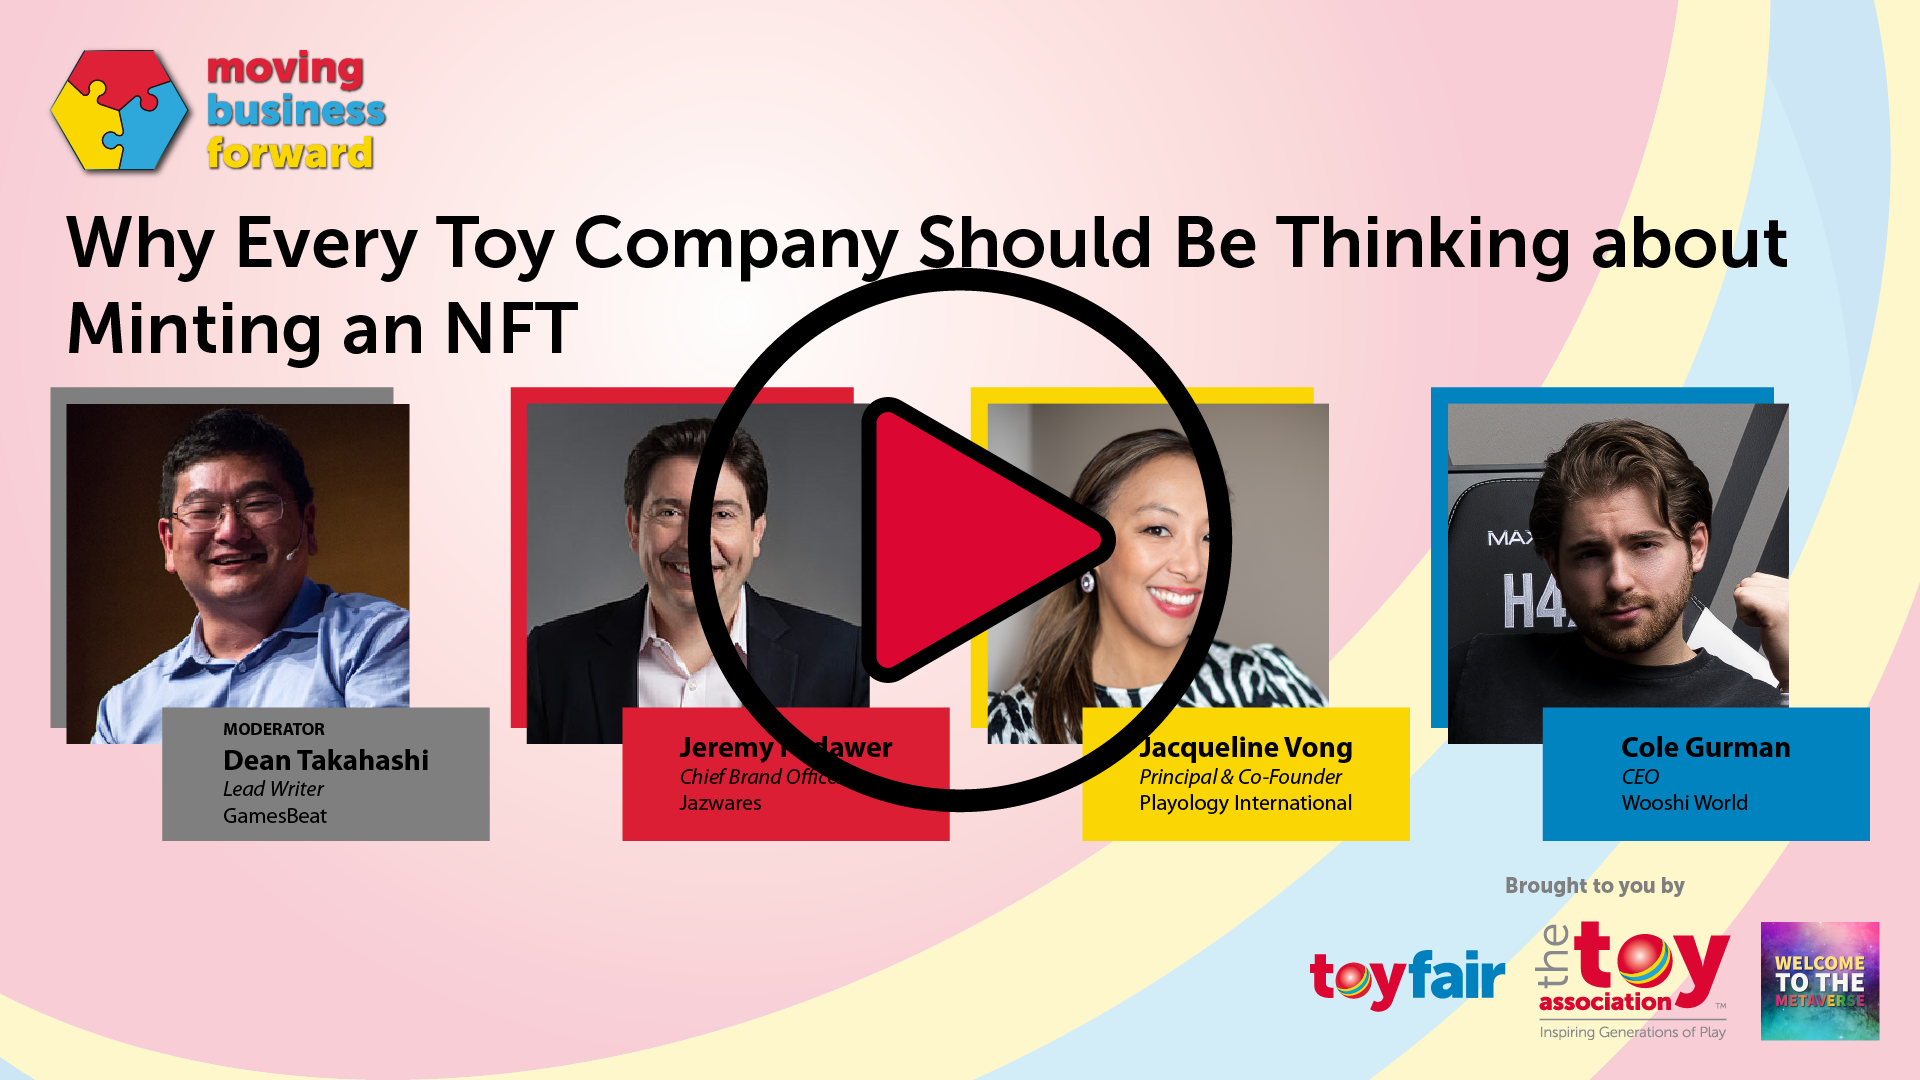 Why Every Toy Company Should Be Thinking about Minting an NFT